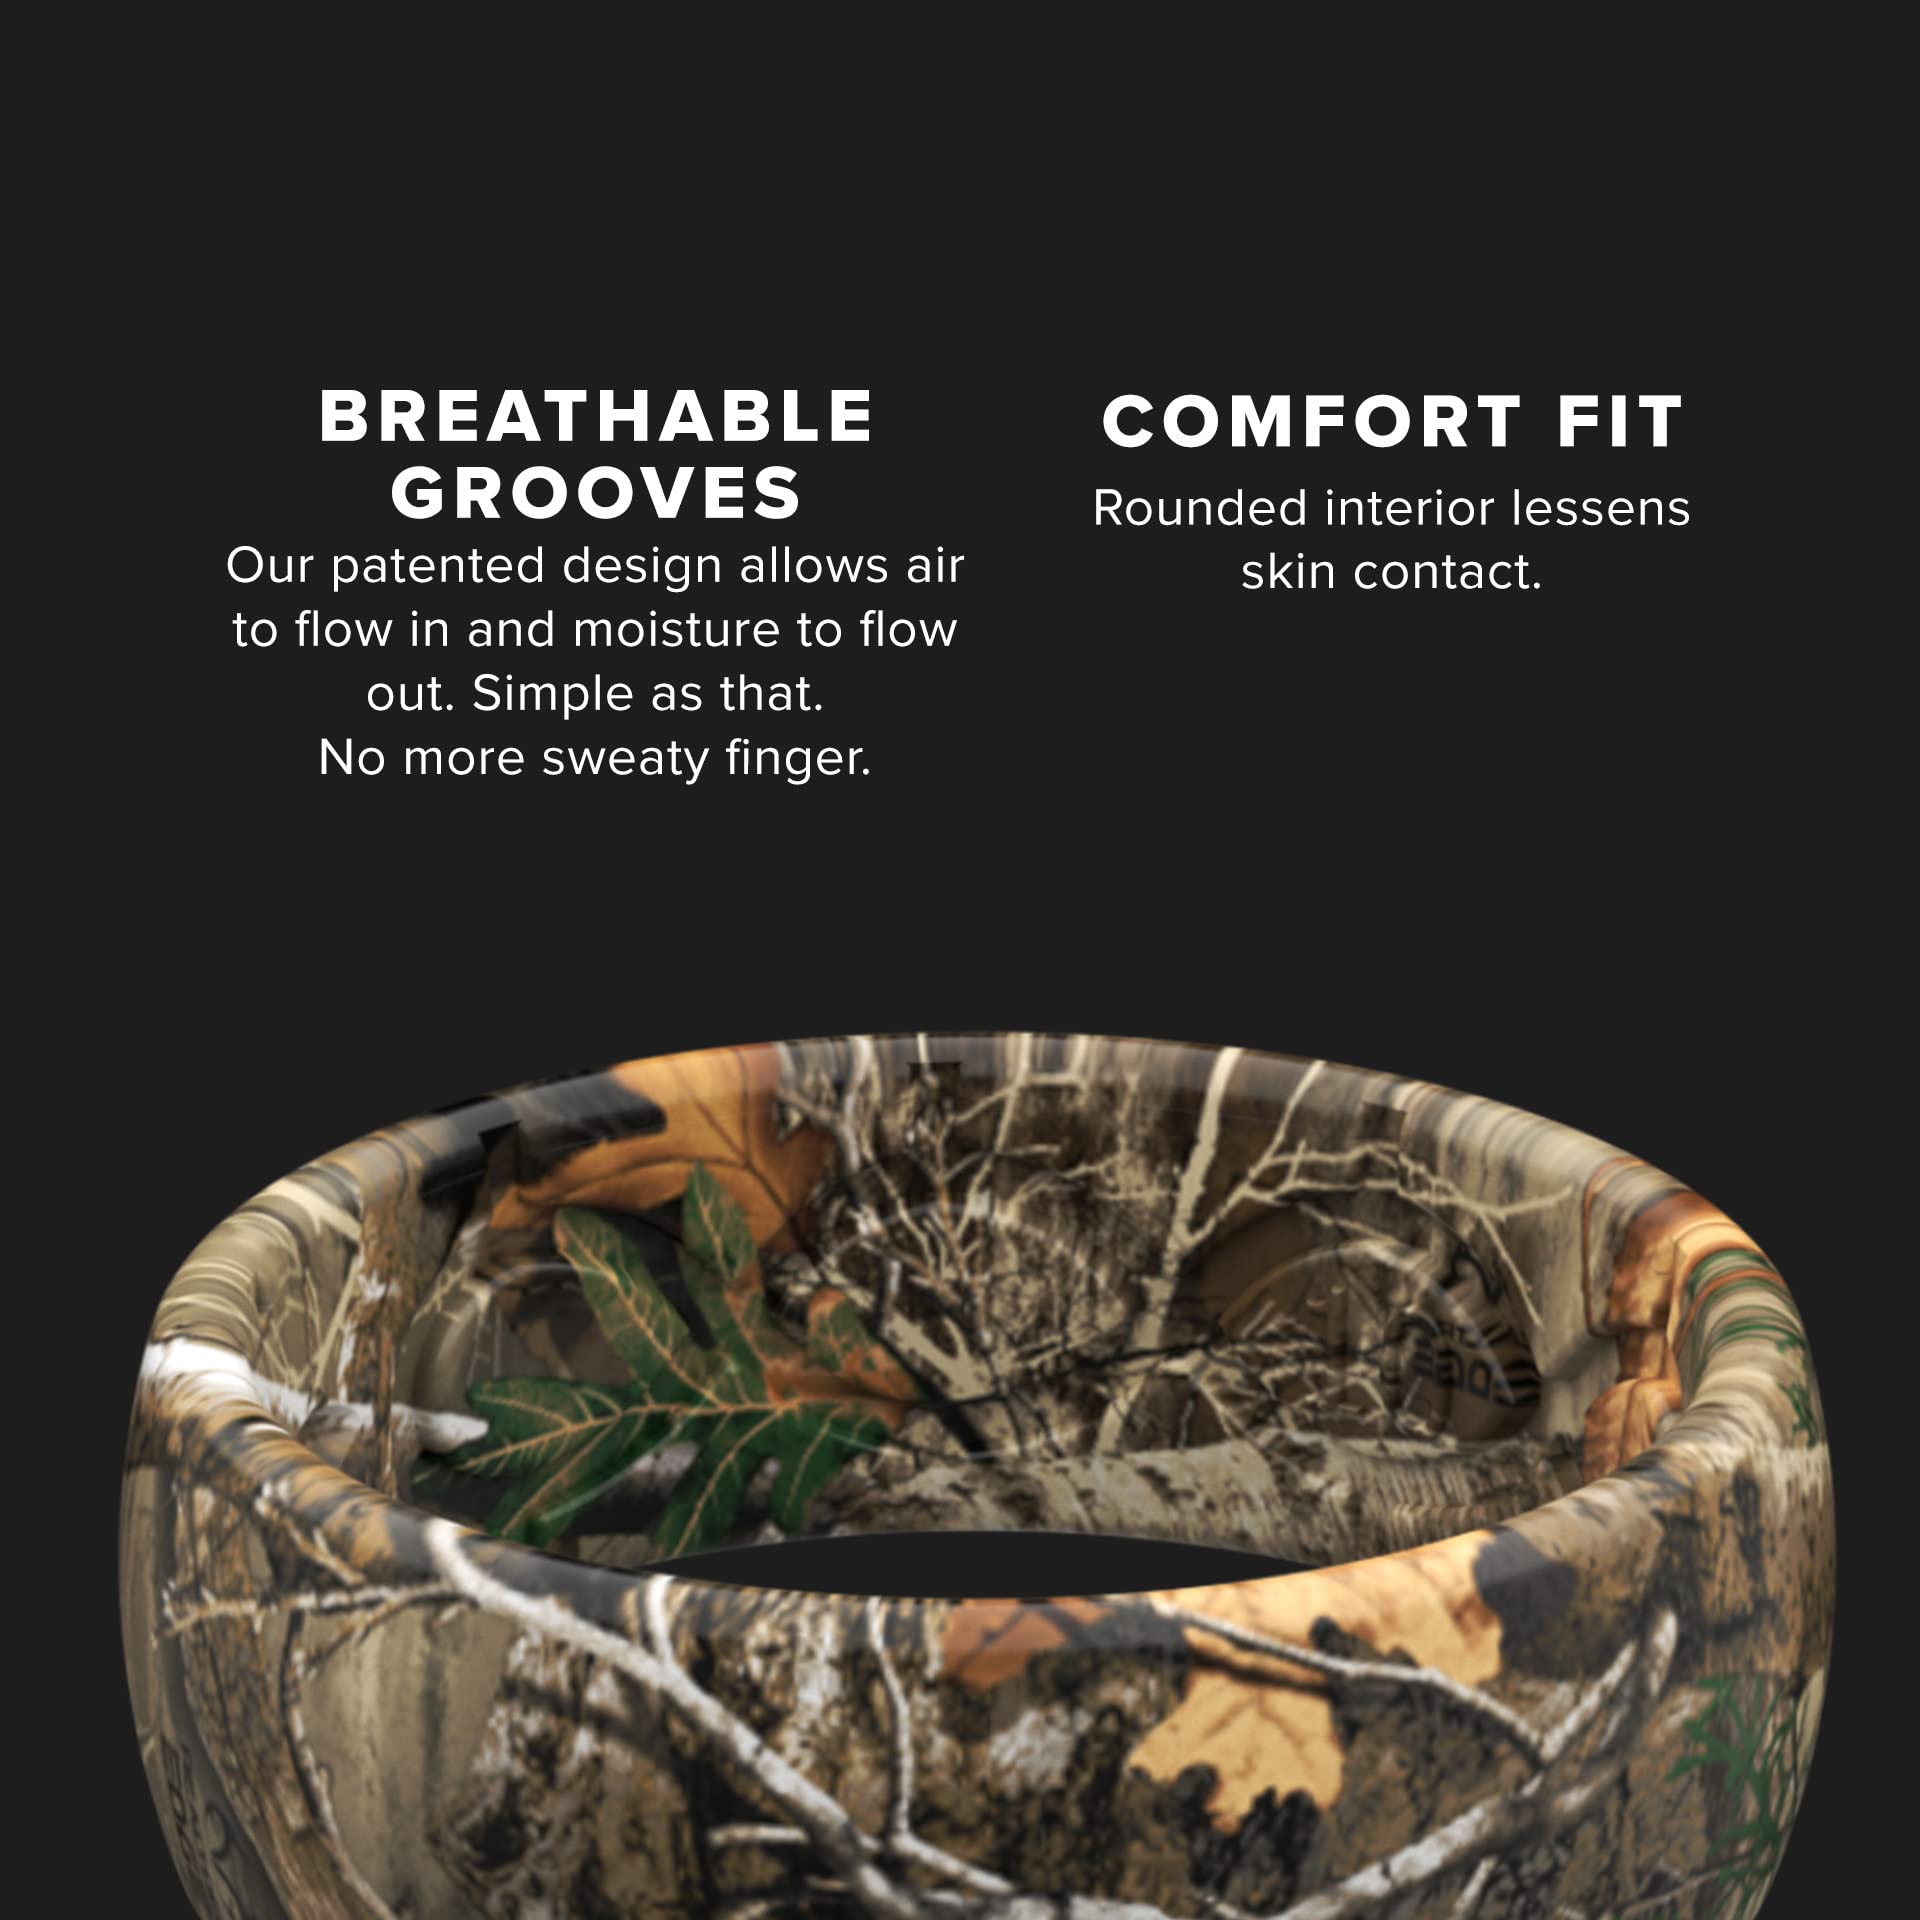 Groove Life RealTree Camo Silicone Ring - Breathable Rubber Wedding Rings for Men, Lifetime Coverage, Unique Design, Comfort Fit Ring